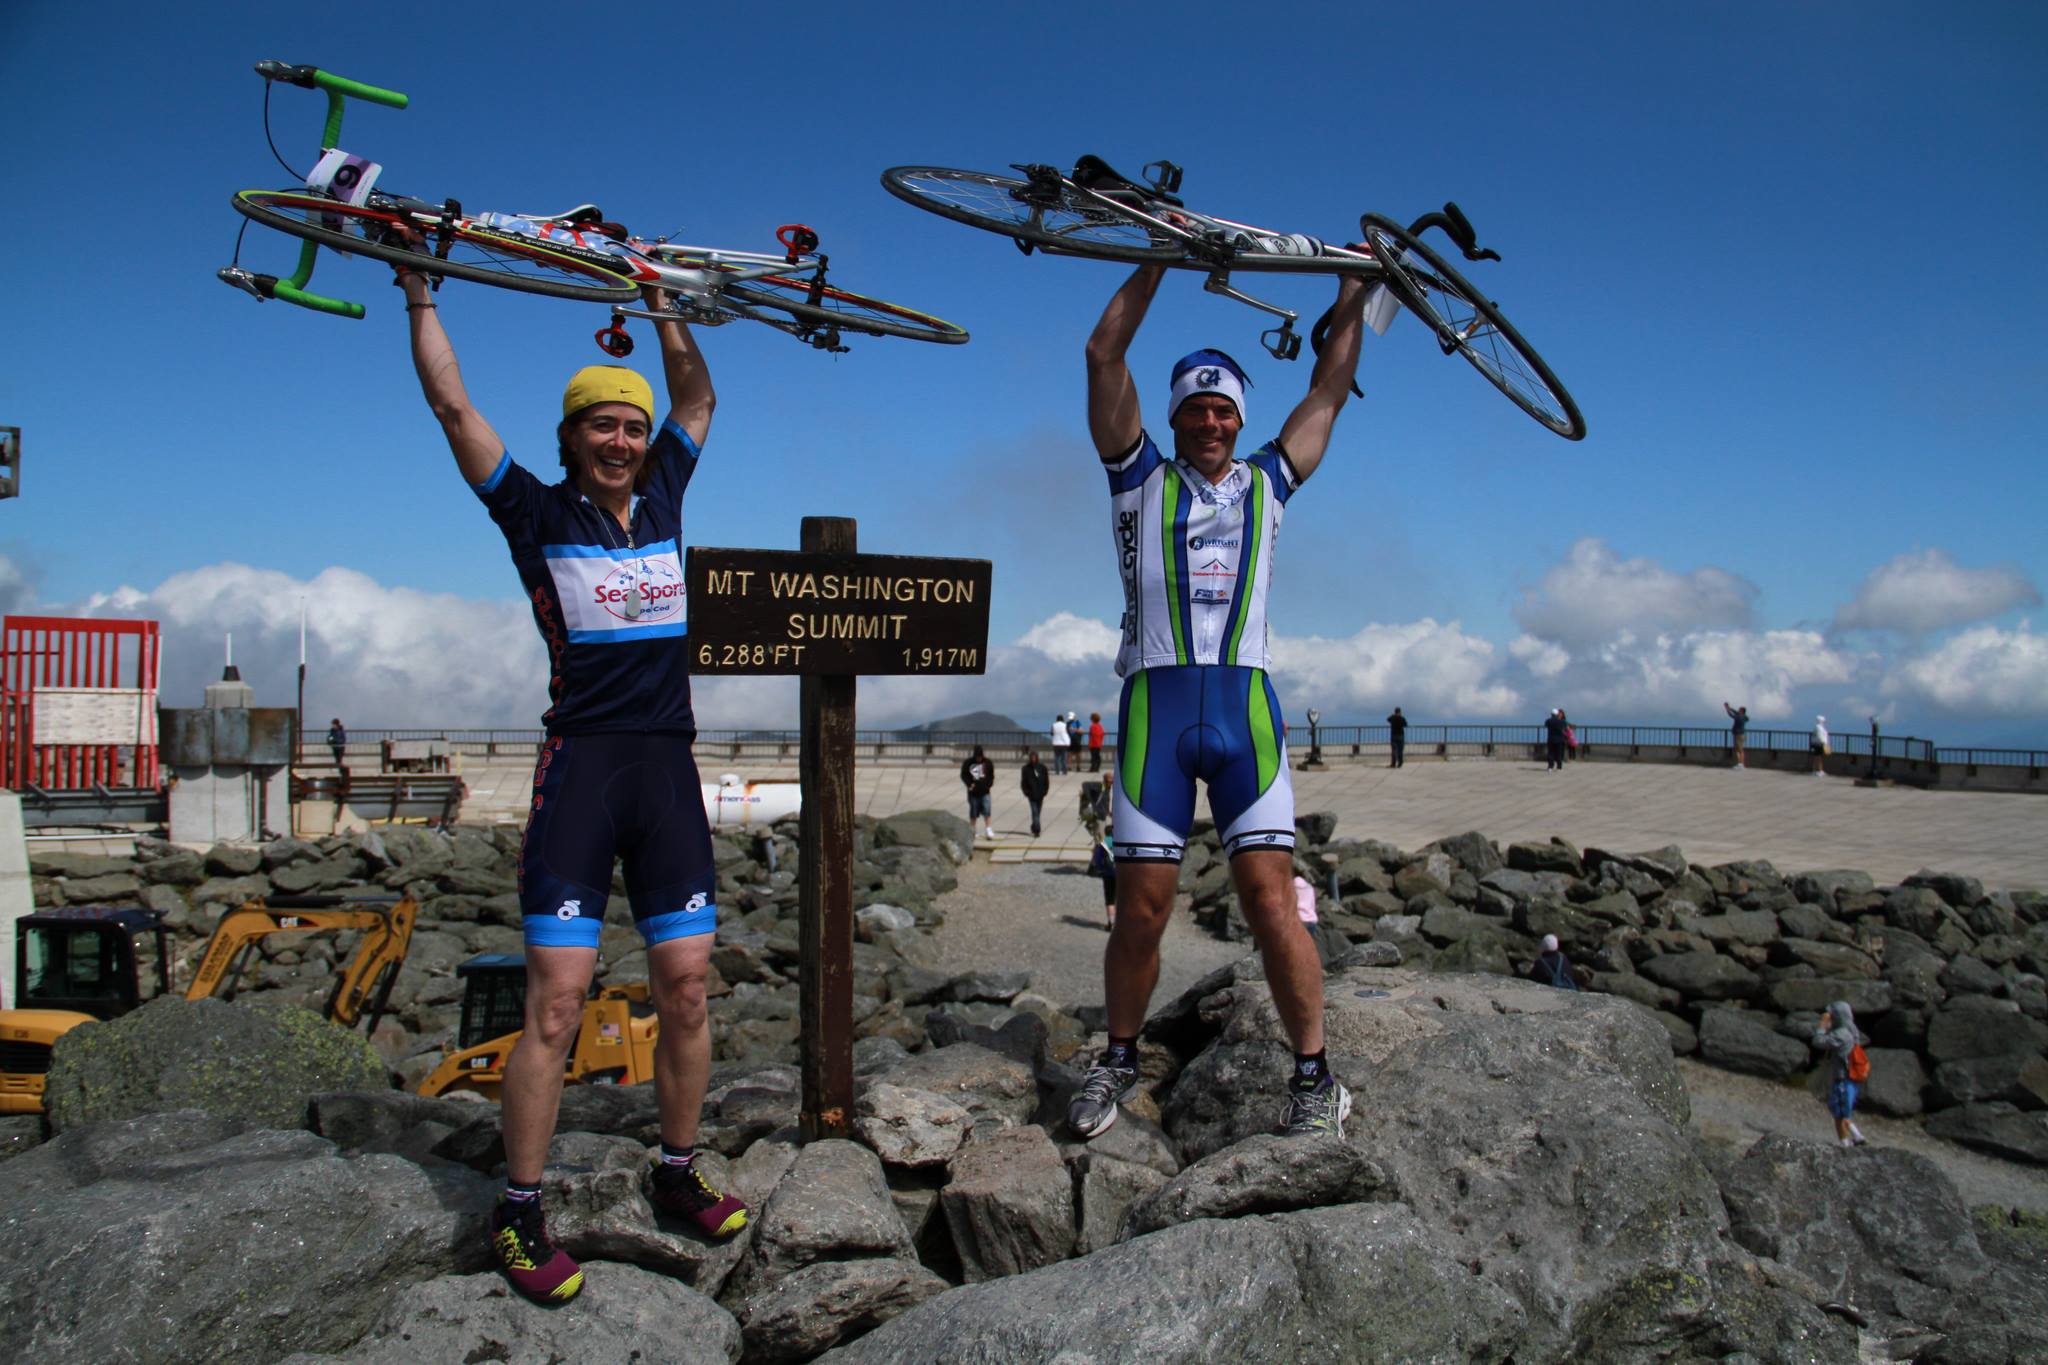 Terry and Rob H conquered the grueling Mt Washington Hill Climb